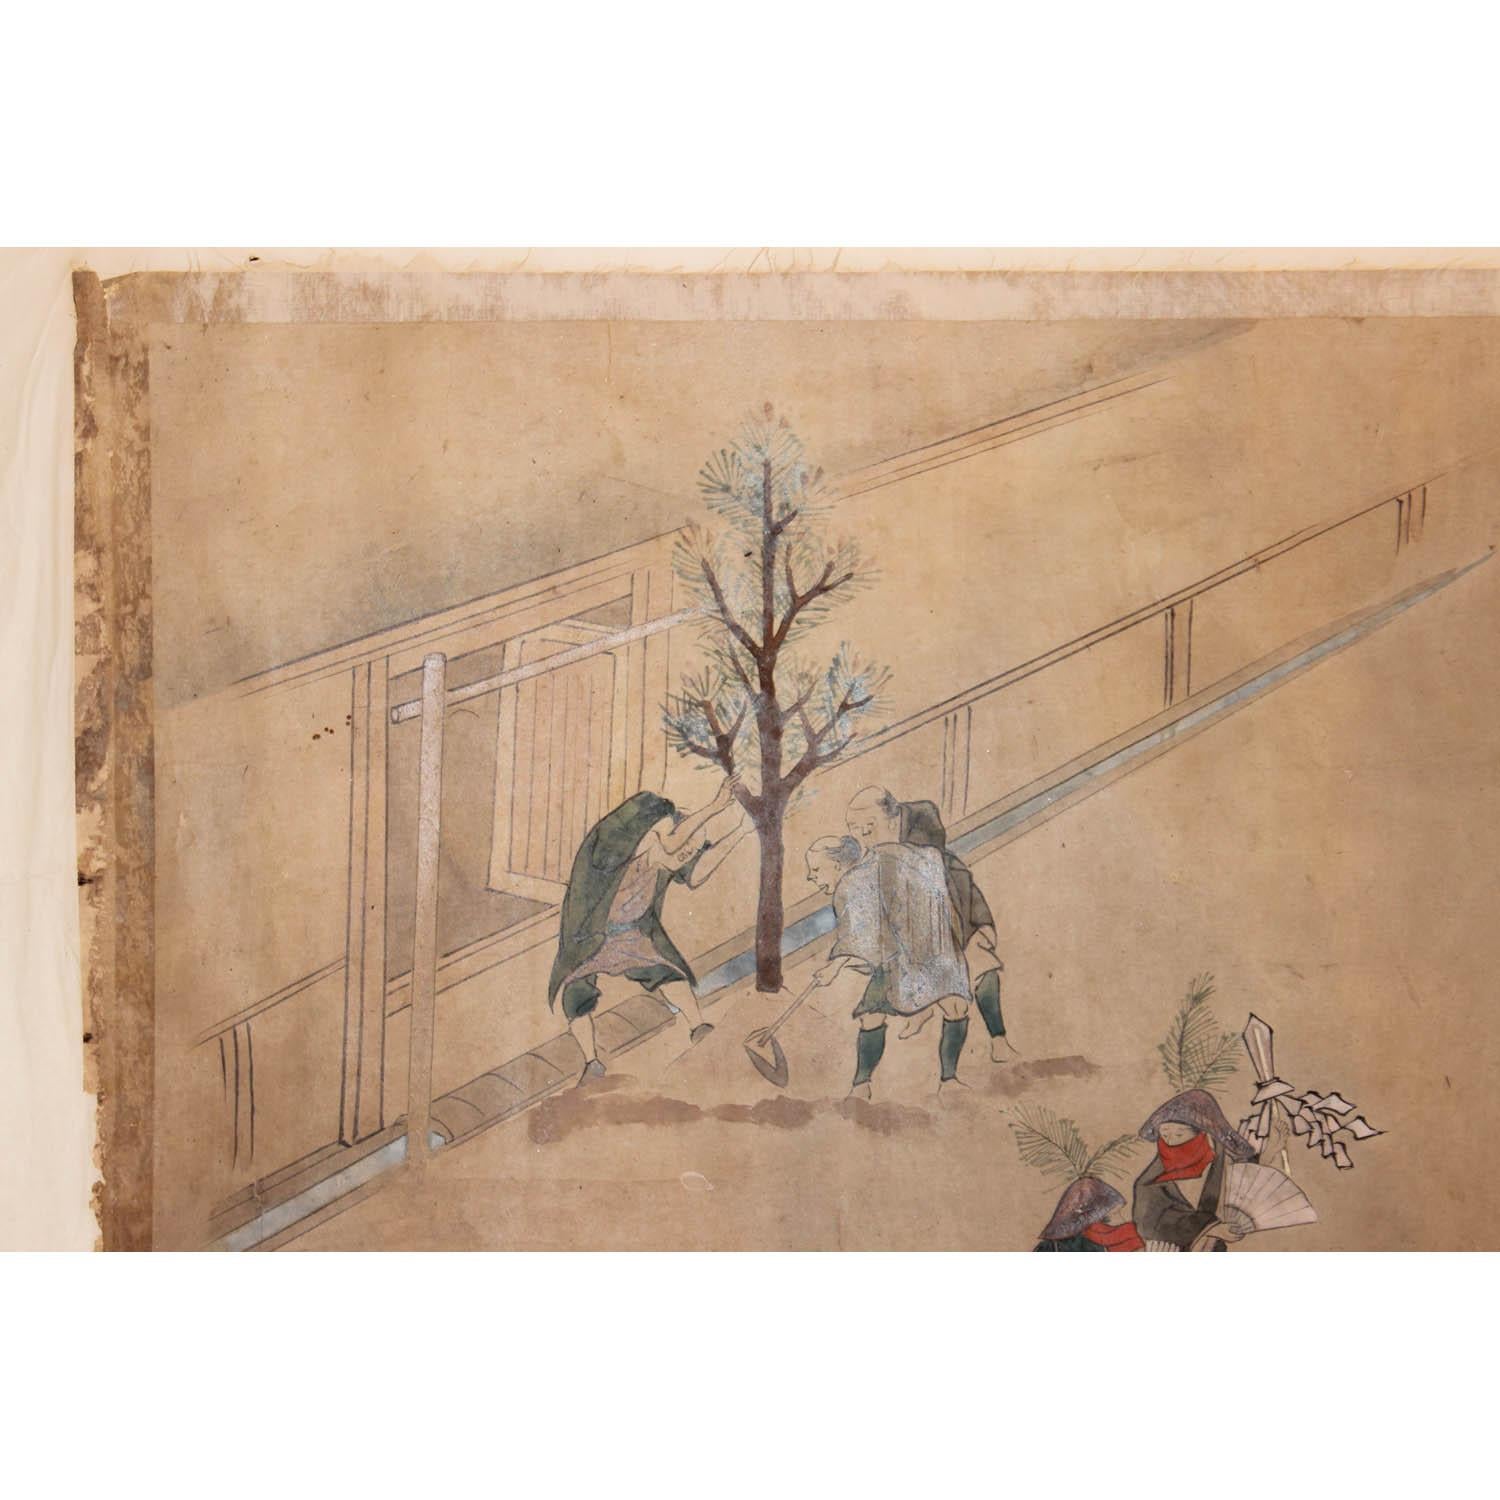 One in a series of hand painted scroll paintings recording a local harvest festival. This scroll panel depicts temple workers planting trees and others are bringing food for the harvest festivities. Edo period. The painted panel measures 14 x 22. 